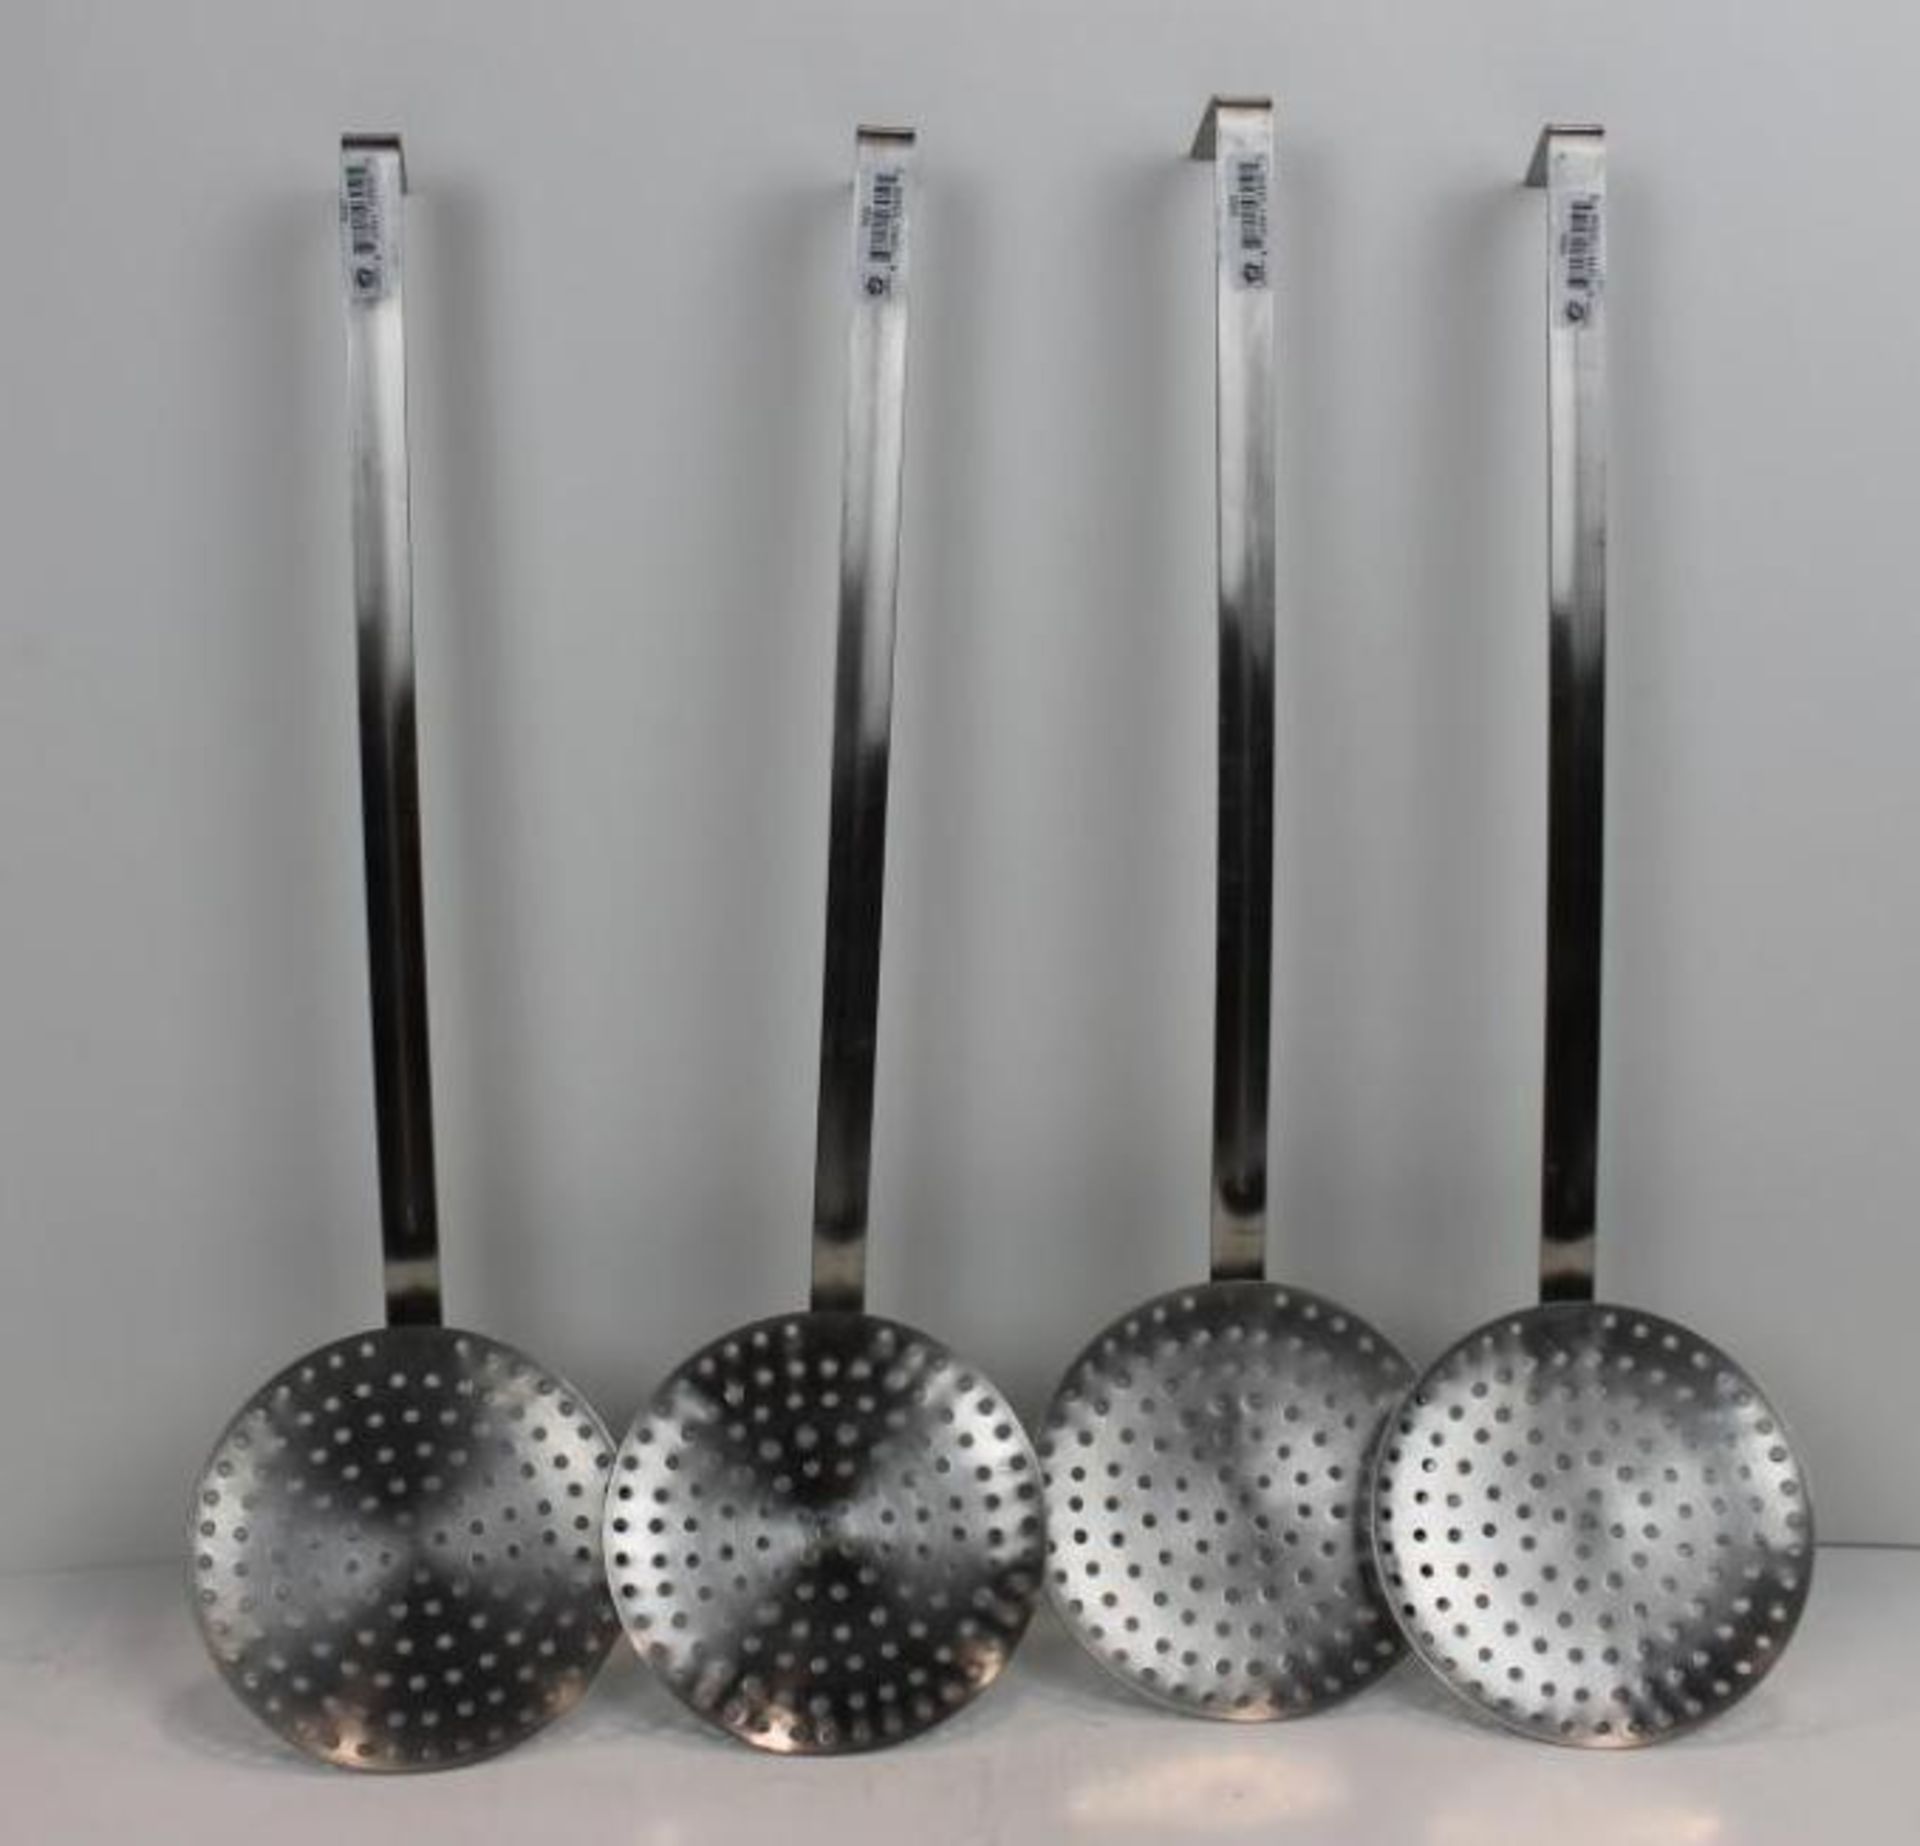 18" STAINLESS STEEL SKIMMERS (5" ROUND SKIMMER HEAD) #3050 - LOT OF 4 - NEW - Image 3 of 3